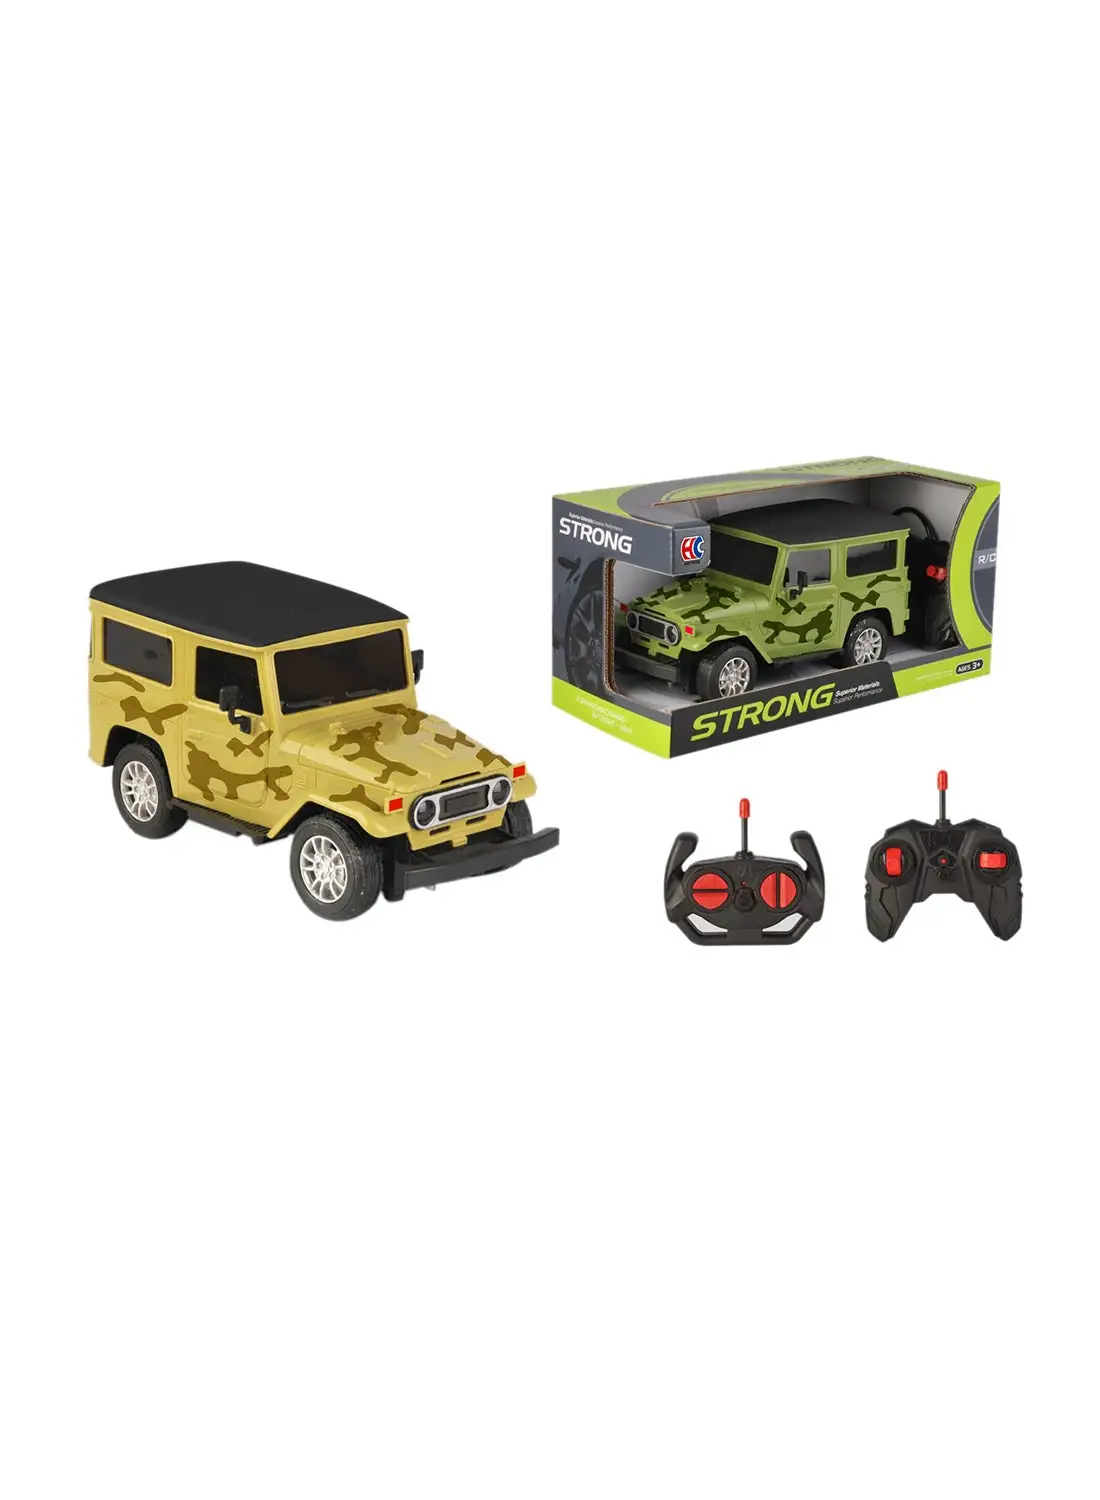 HC R/C Strong Car - Assorted